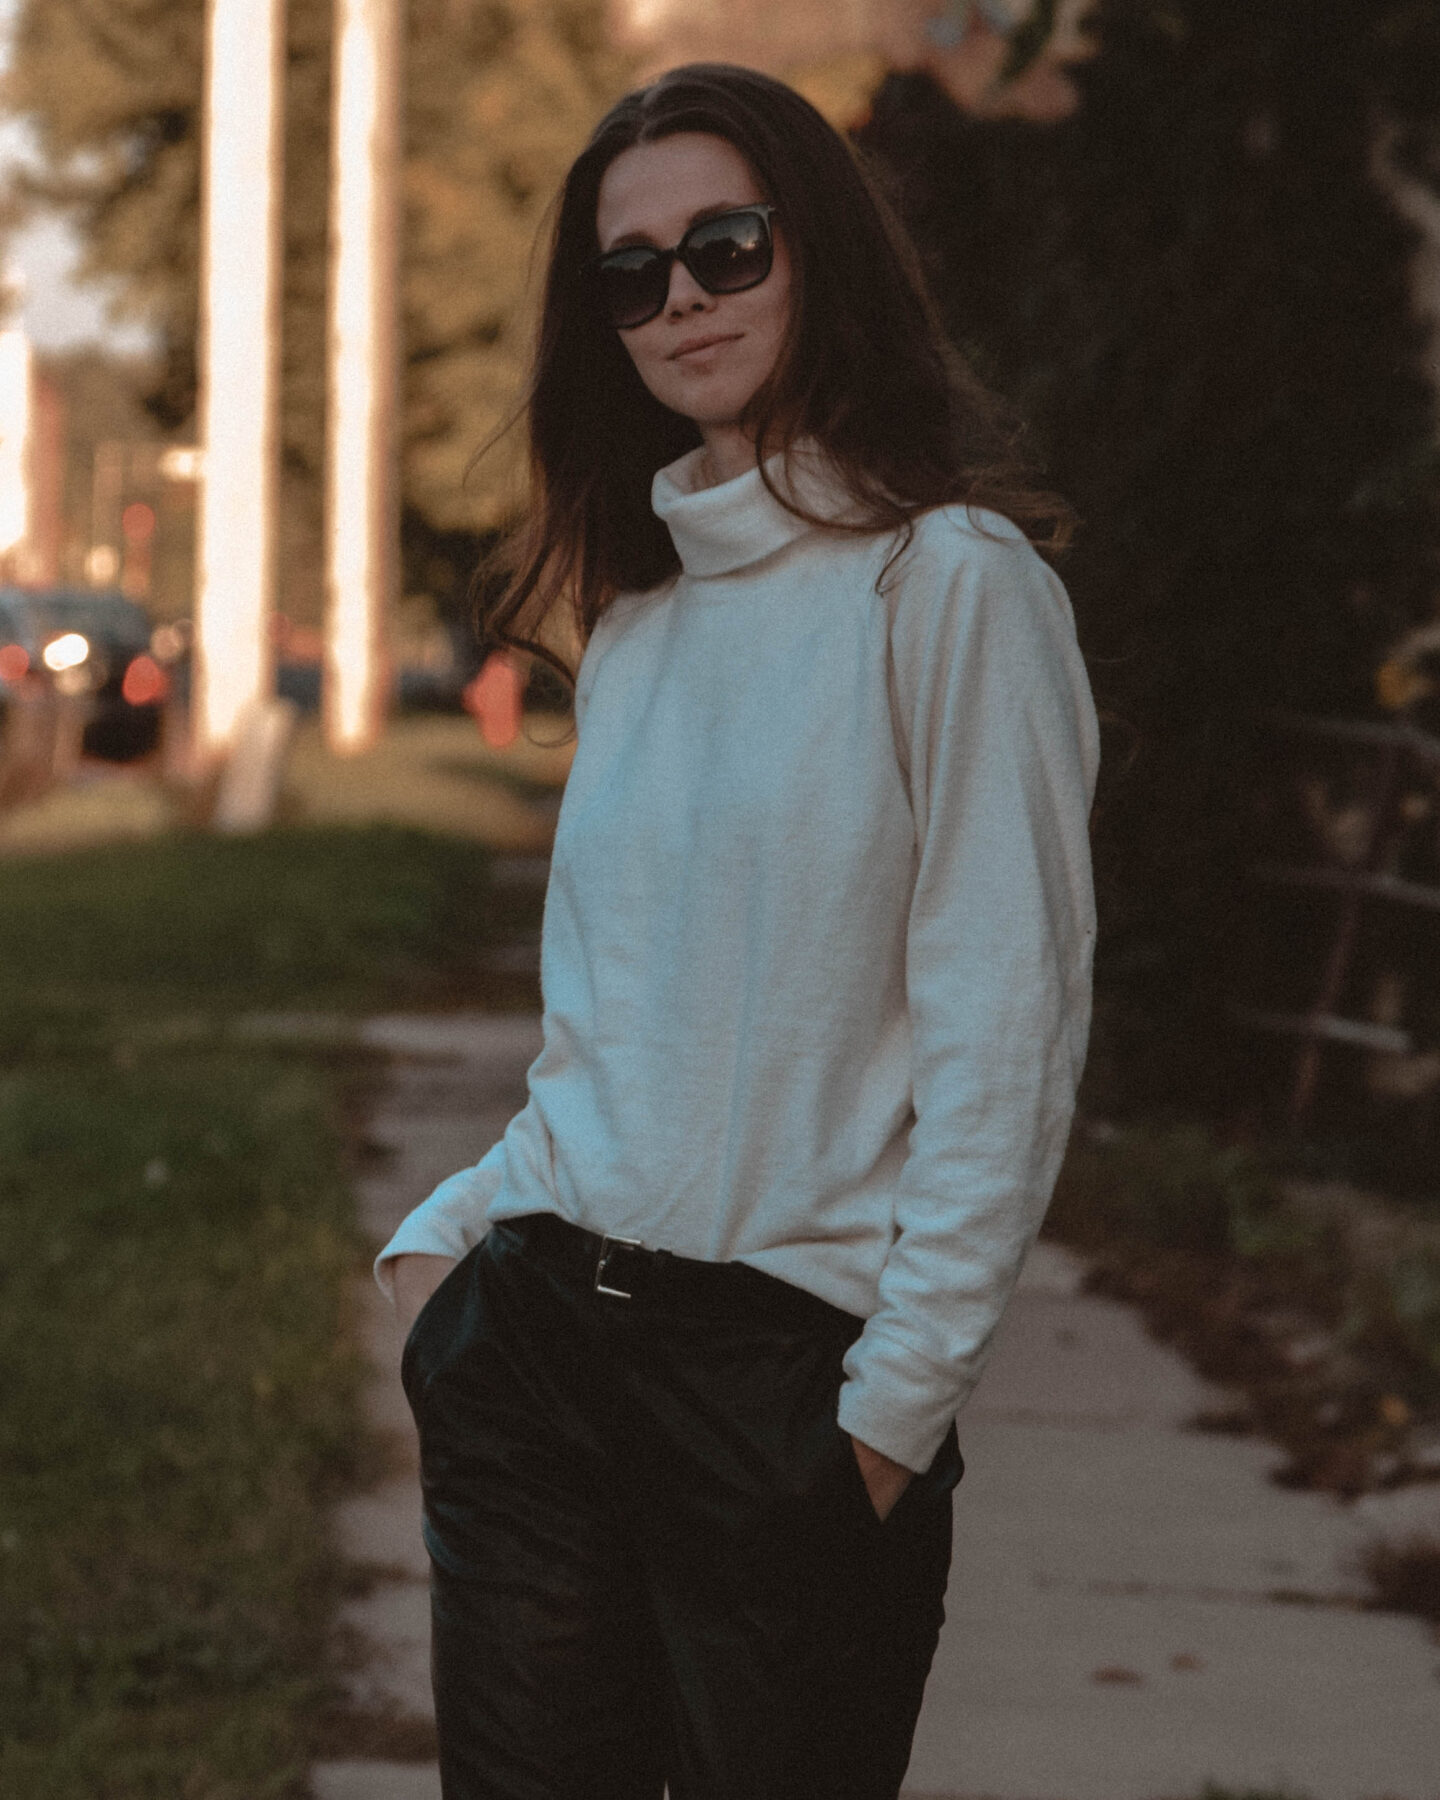 How to Find Personal Style | How to | Monochrome Minimalist | Autumn Fashion